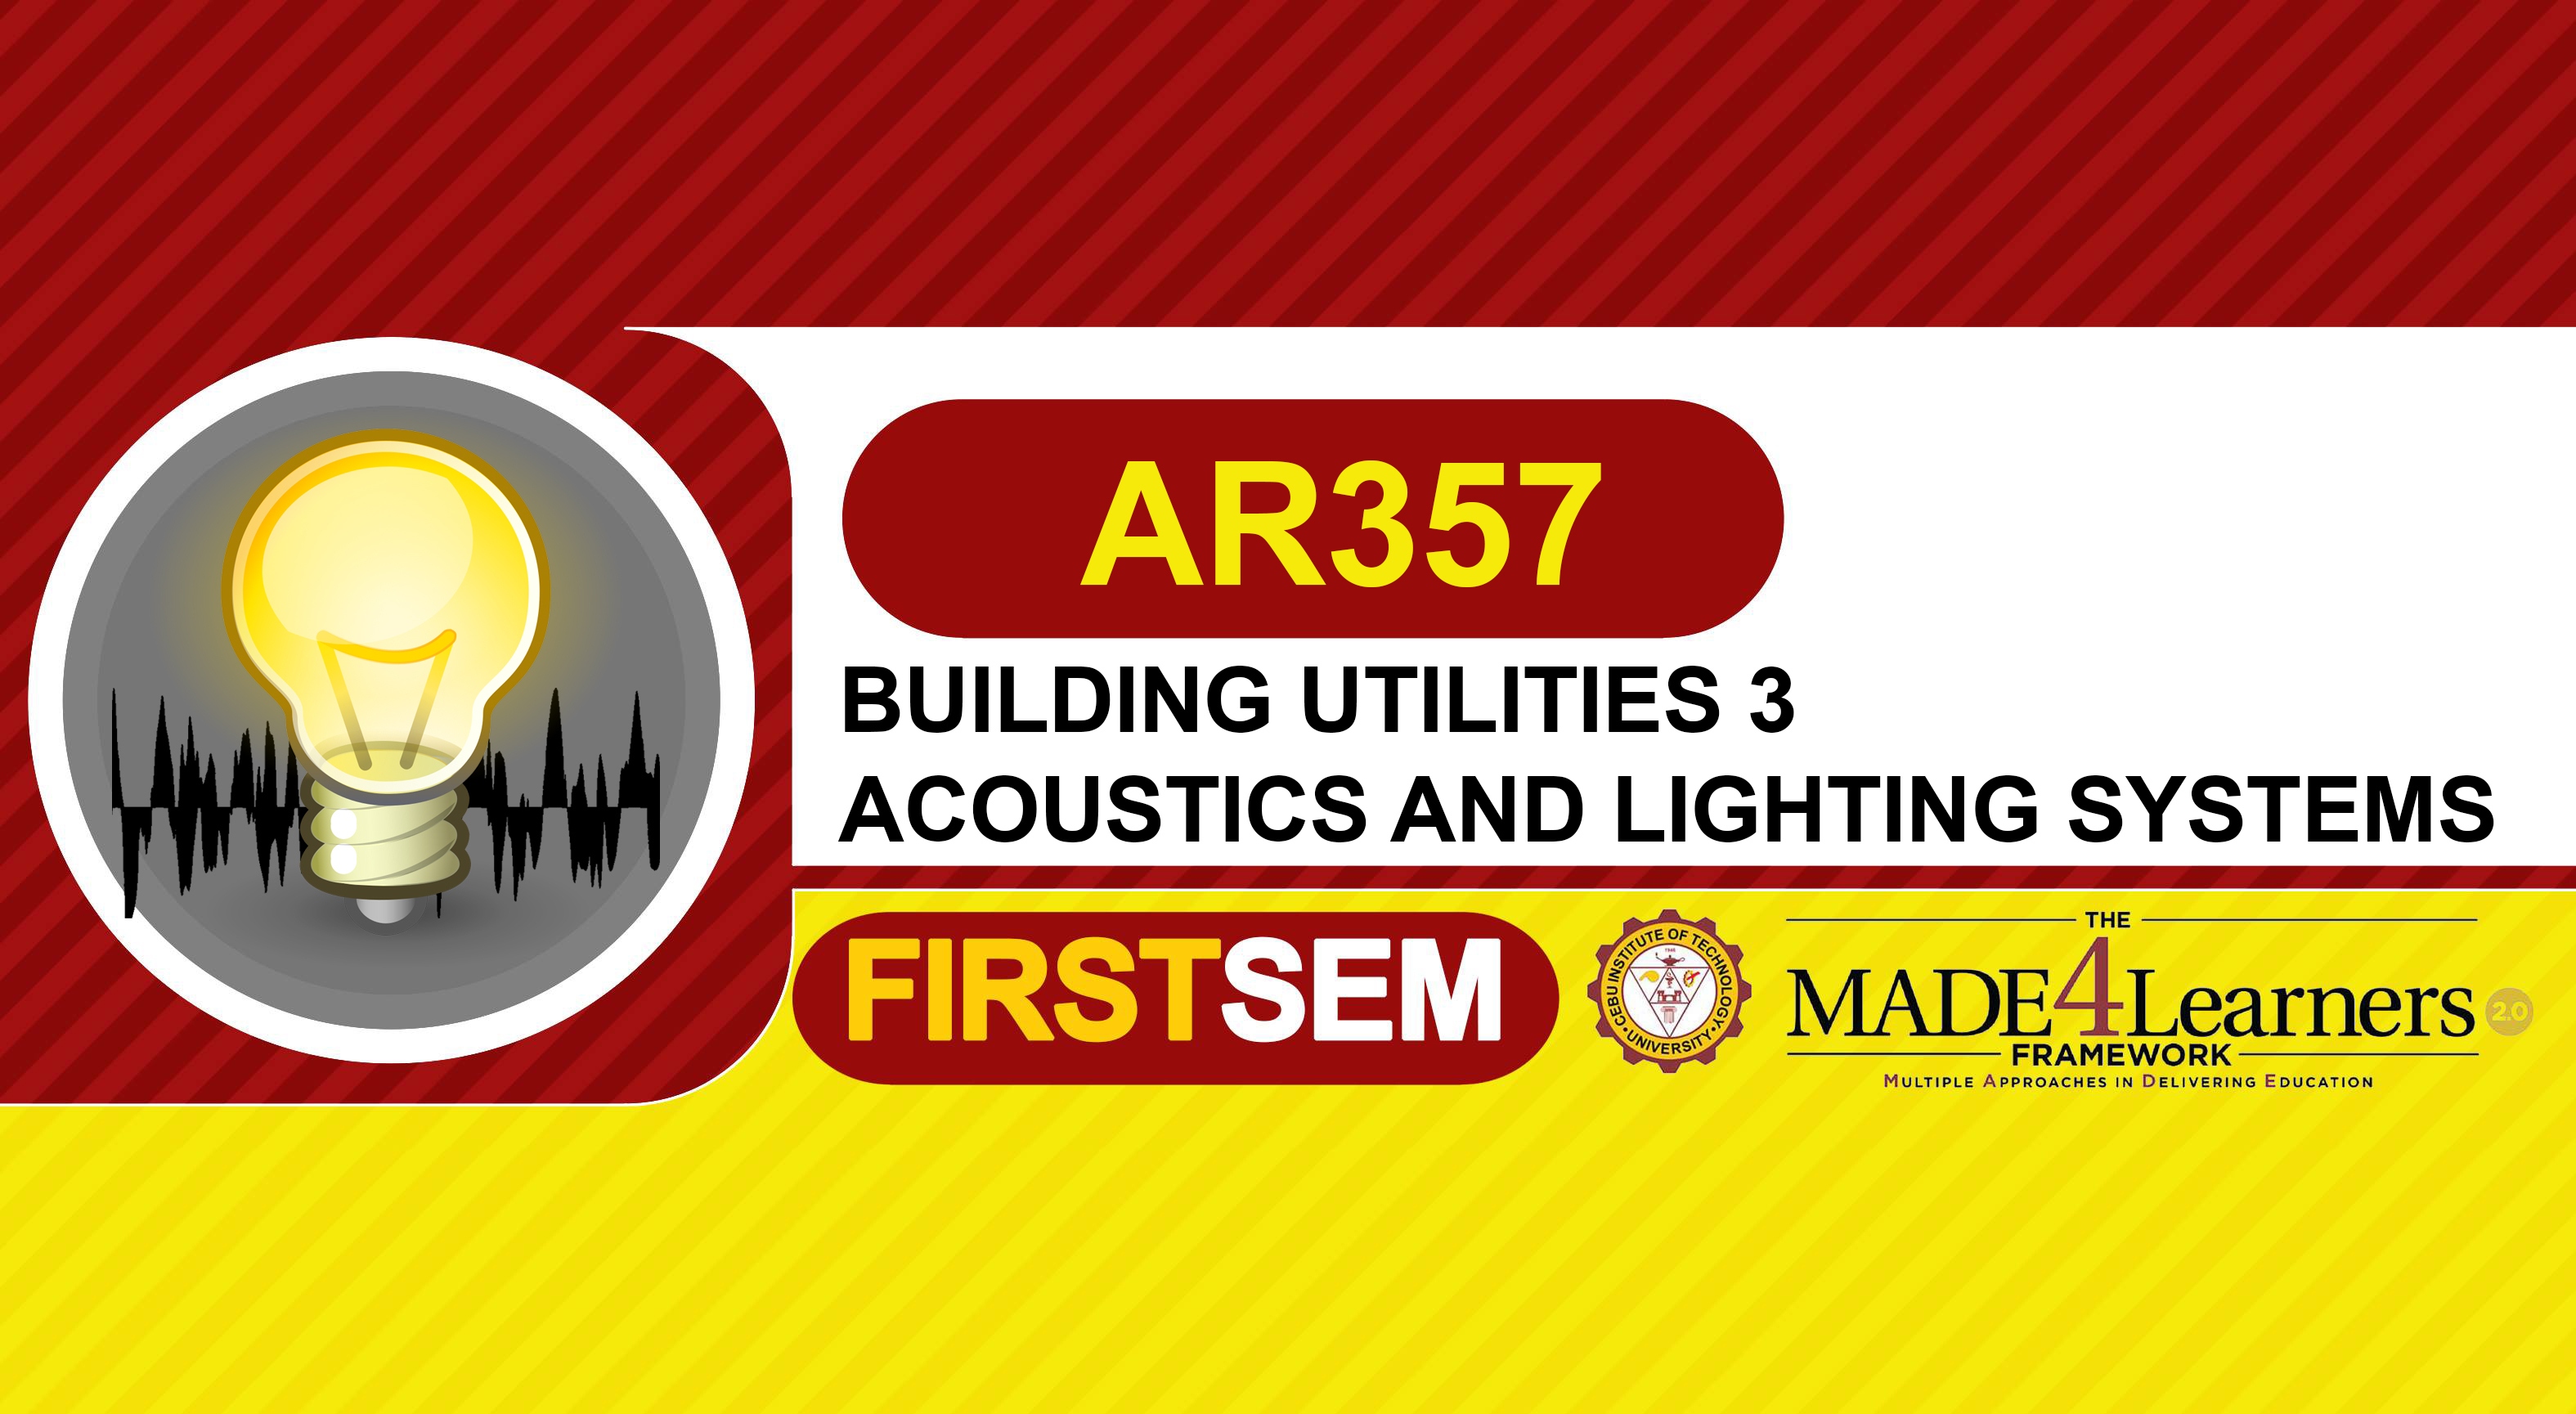 AR357: BUILDING UTILITIES 3 - Acoustics and Lighting Systems